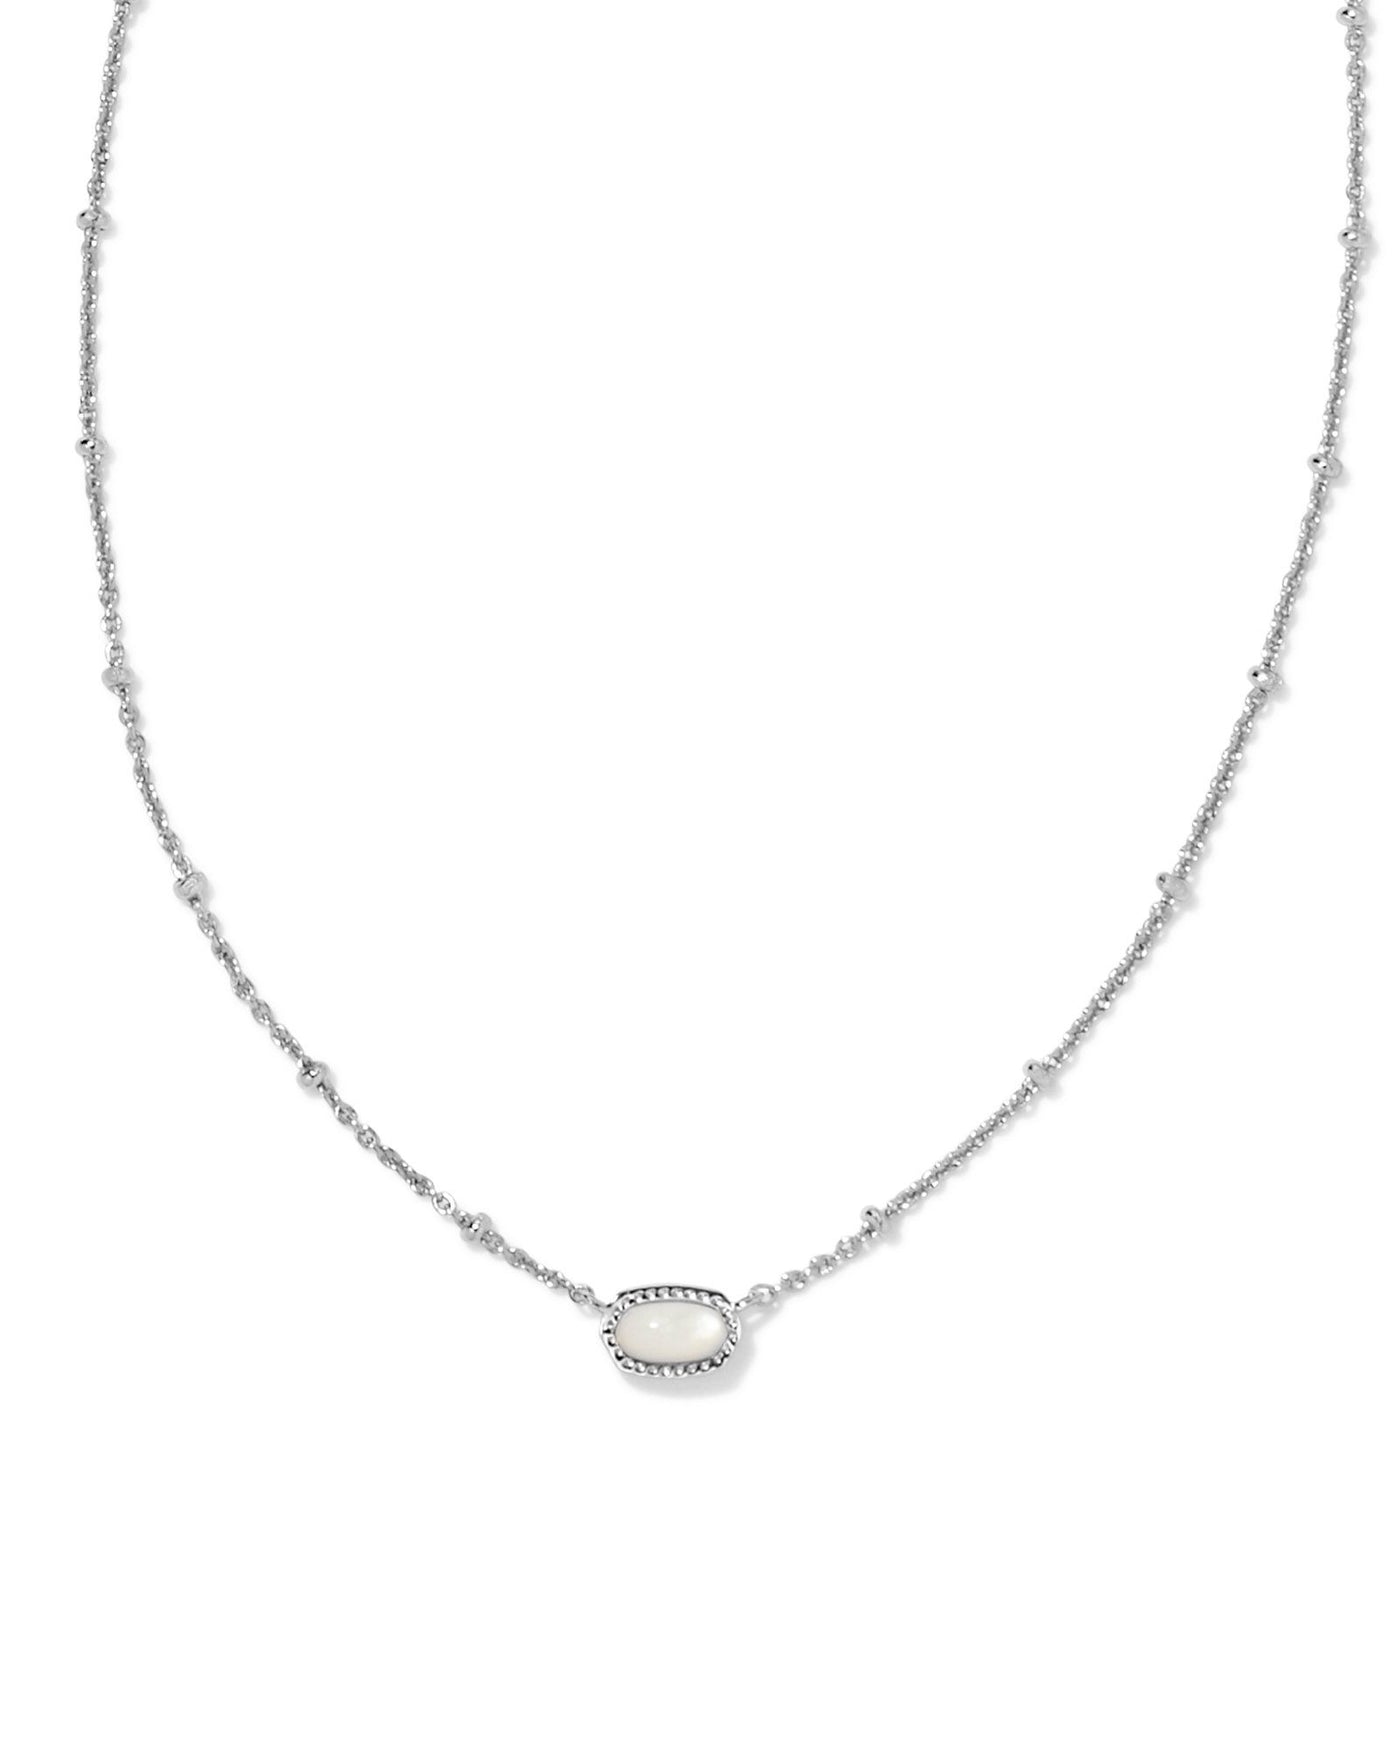 Kendra Scott Mini Elisa Satellite Necklace in Silver Mother of Pearl on white background close up.